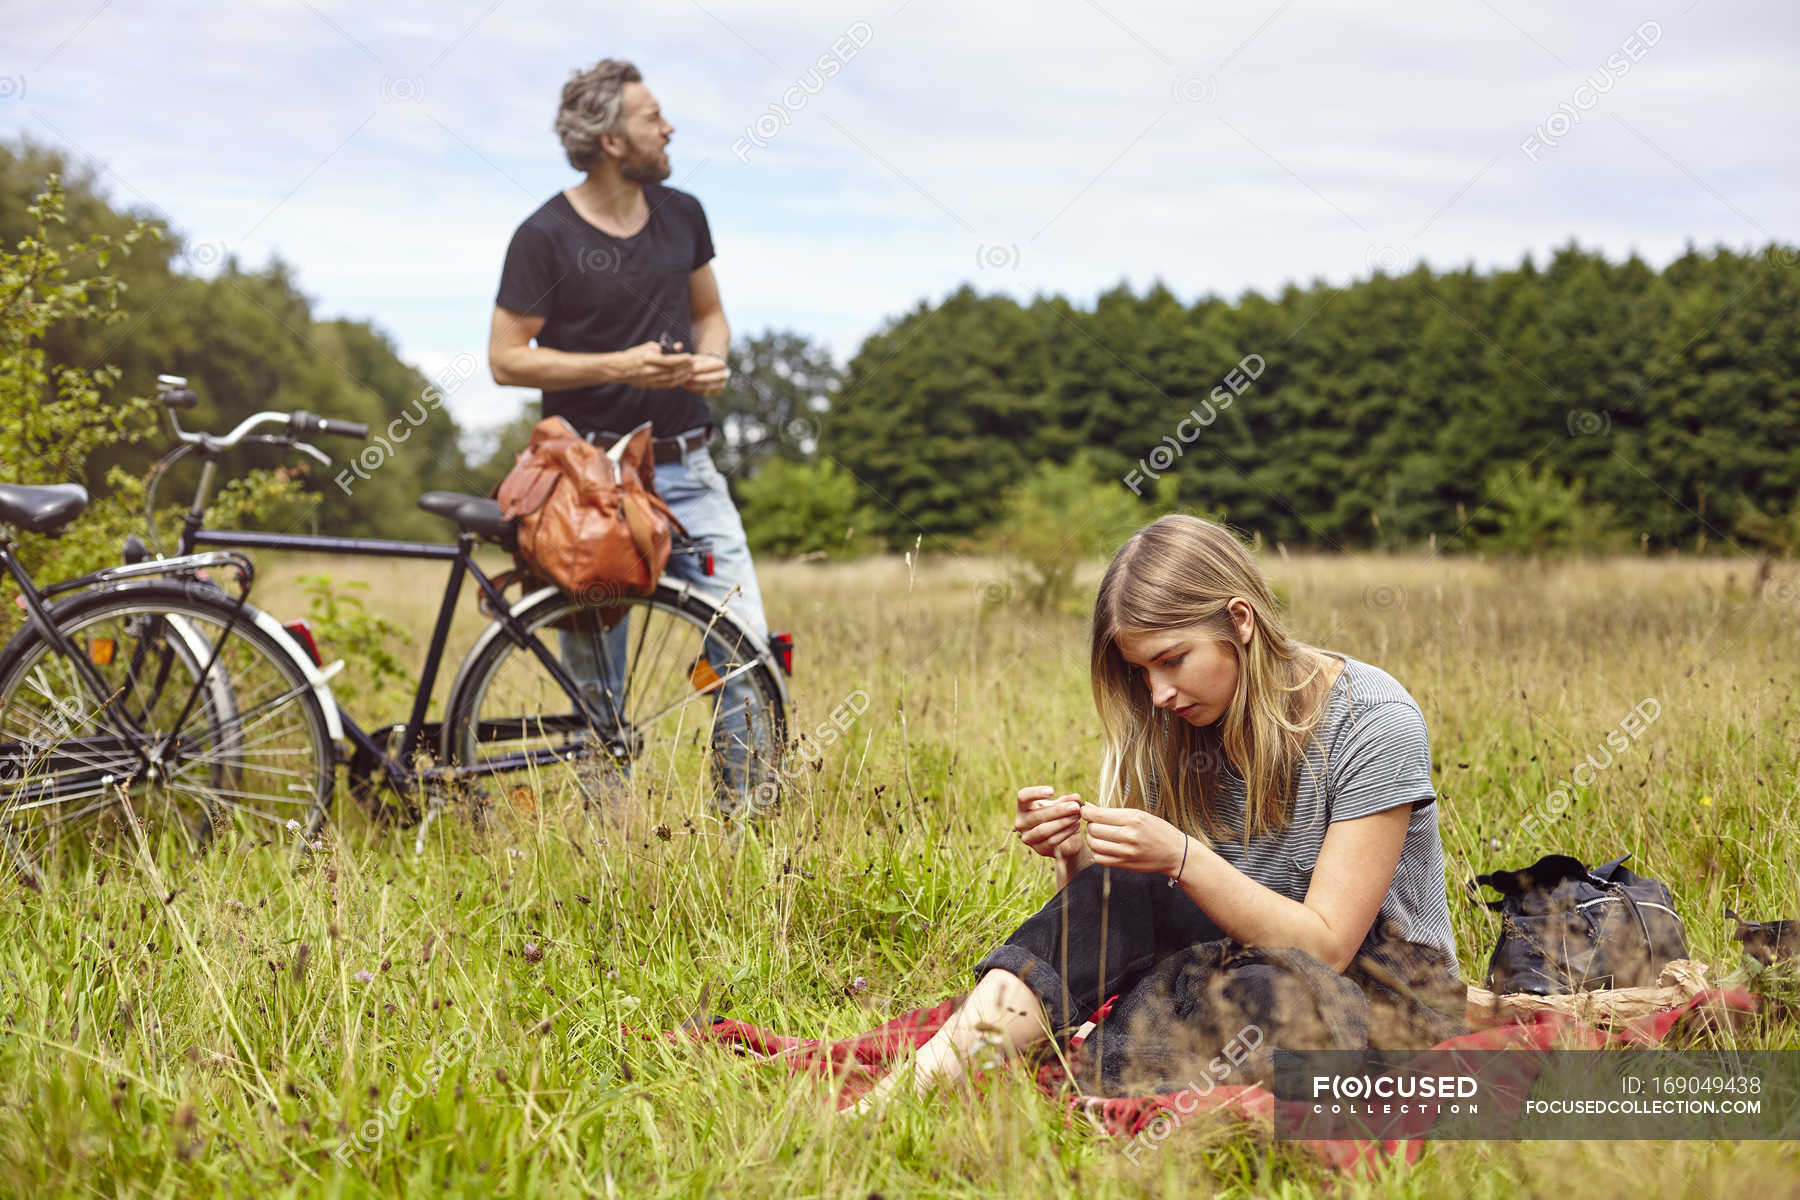 Couple with bicycles picnicing in rural field — Stock Photo | #169049438